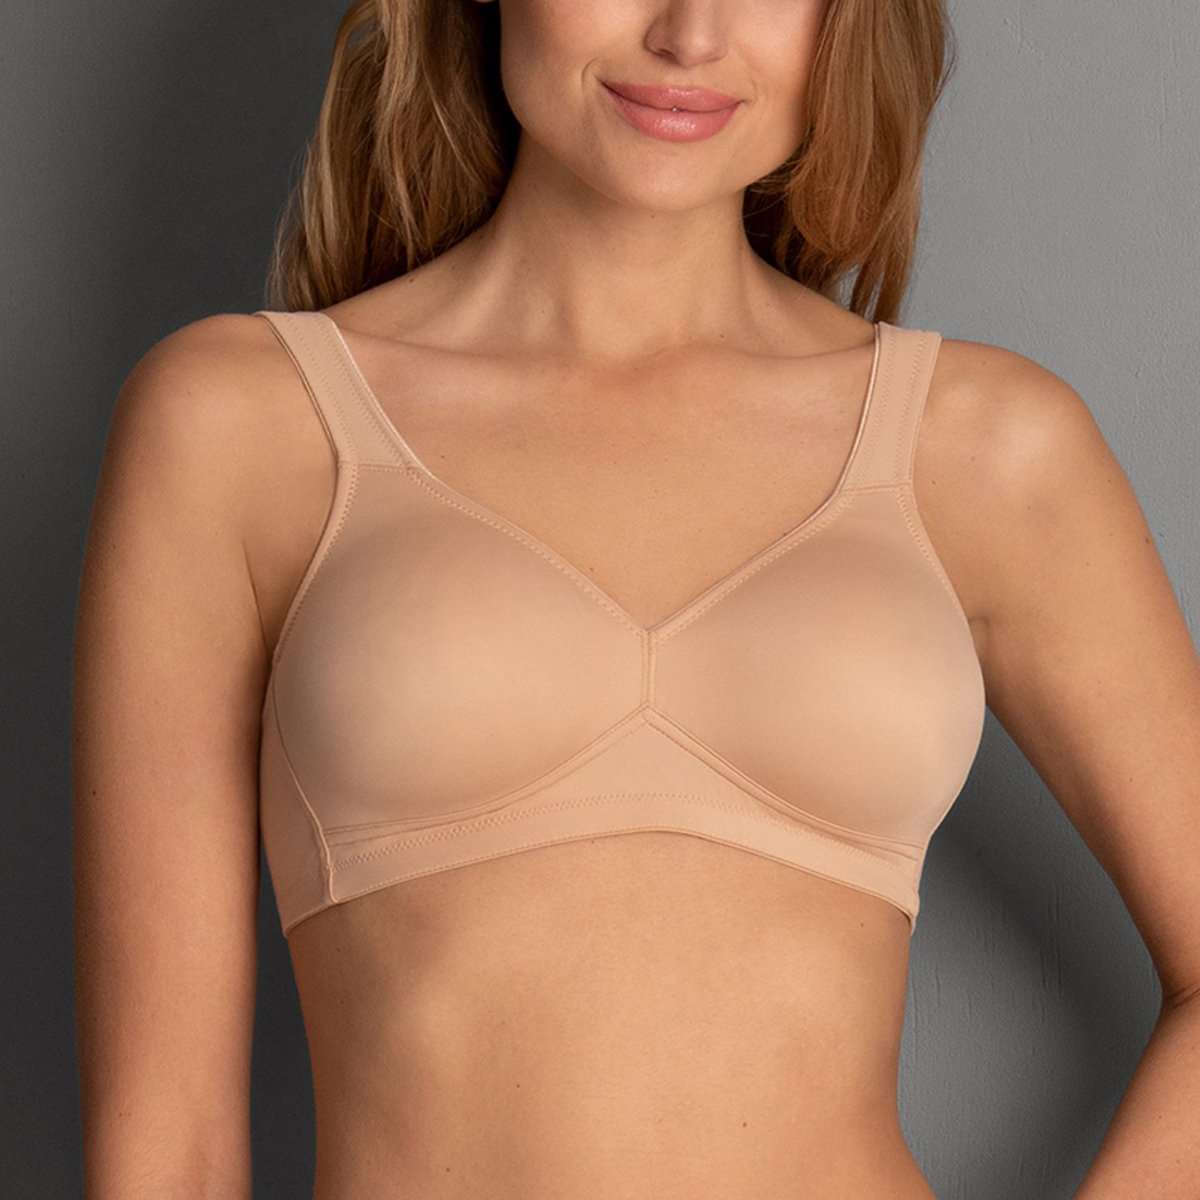 CINSTRON Wireless Bras with Support and Lift, Super Soft Wireless